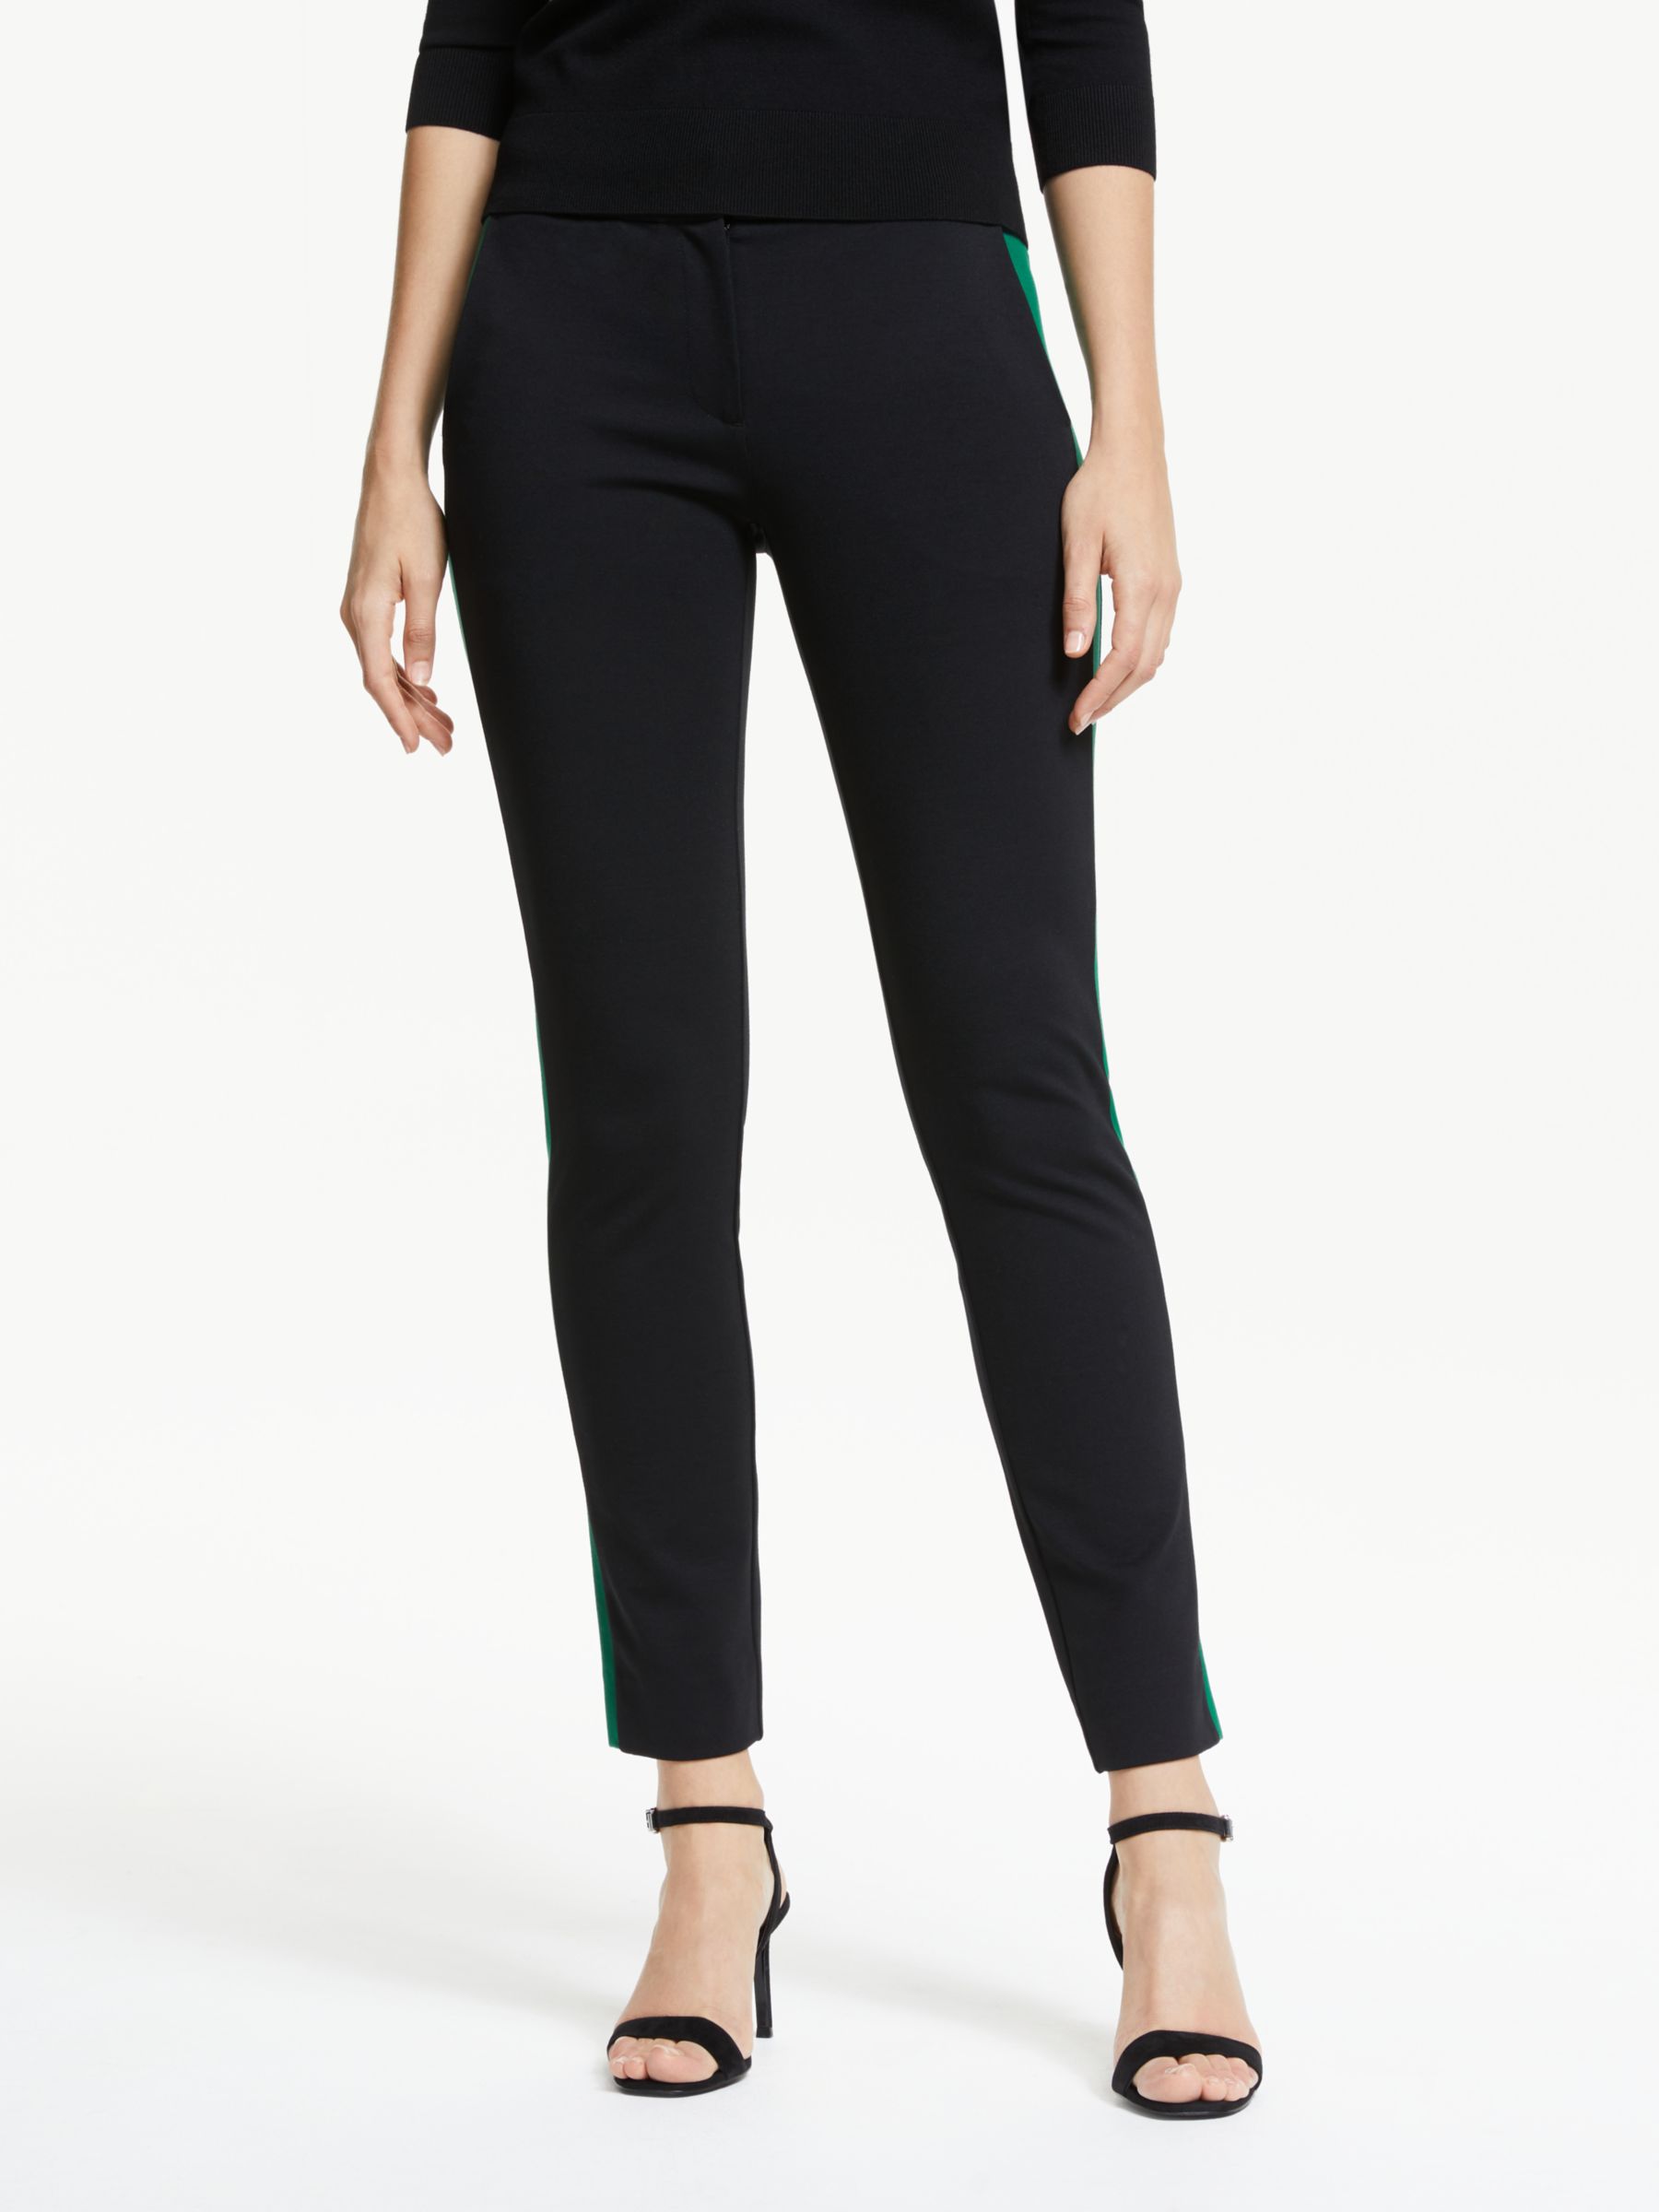 Winser London Miracle Classic Stripe Trousers